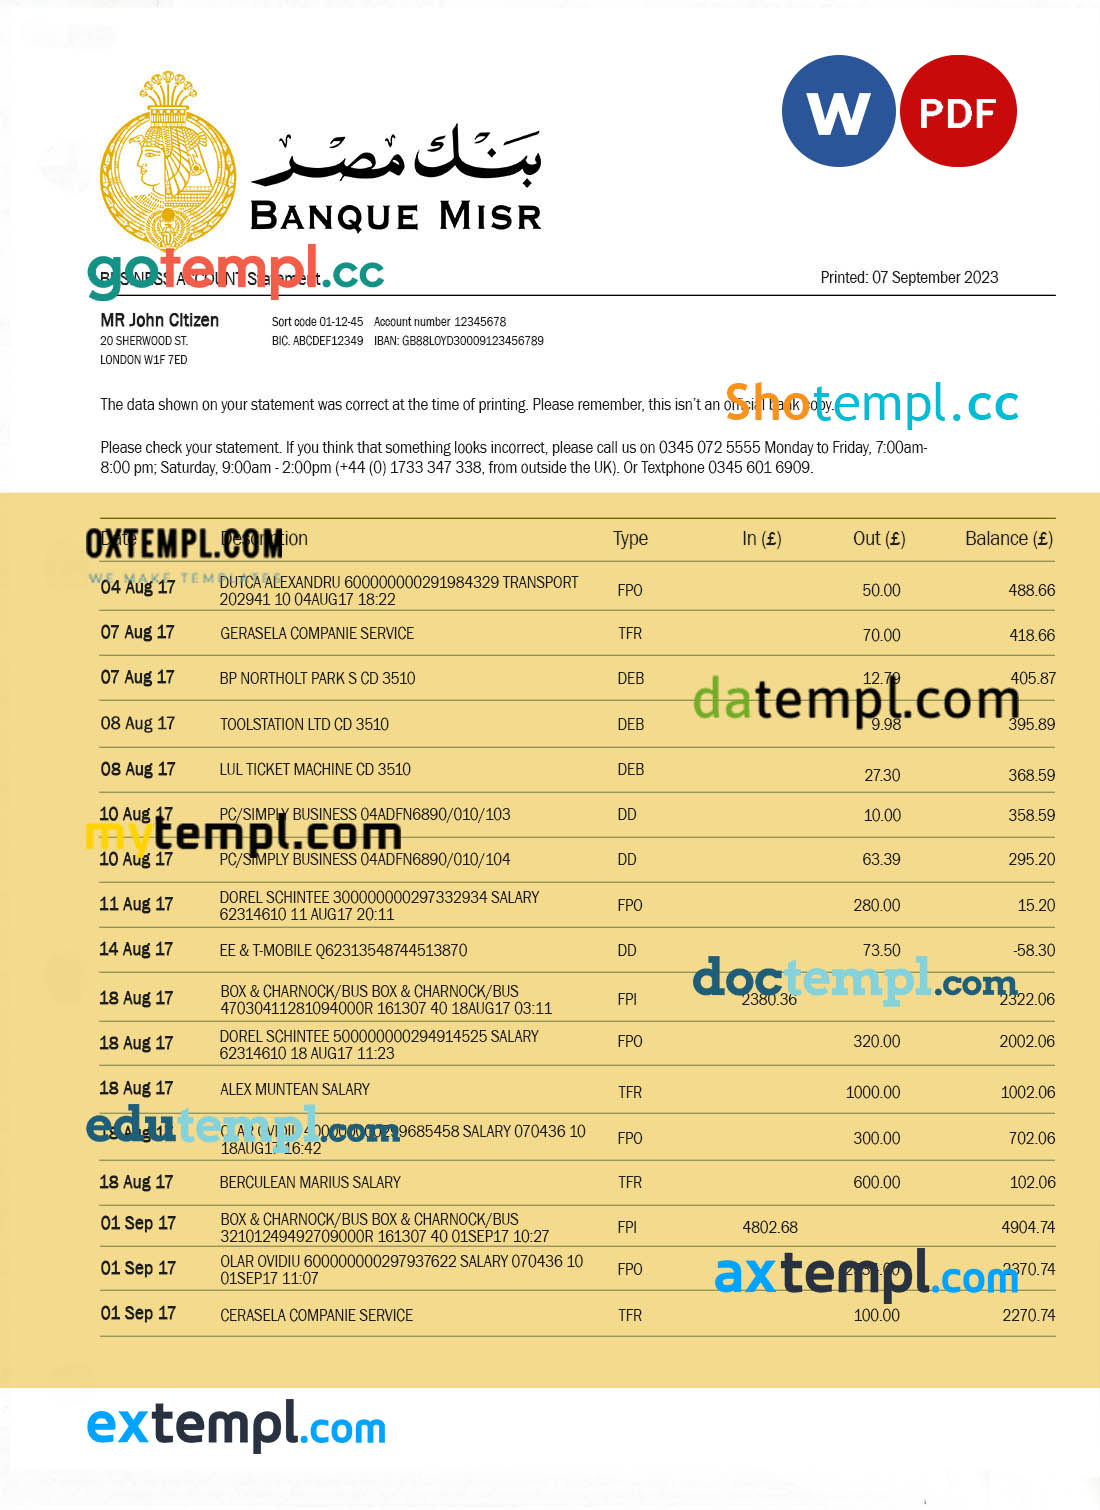 asp software developer business plan template in Word and PDF formats